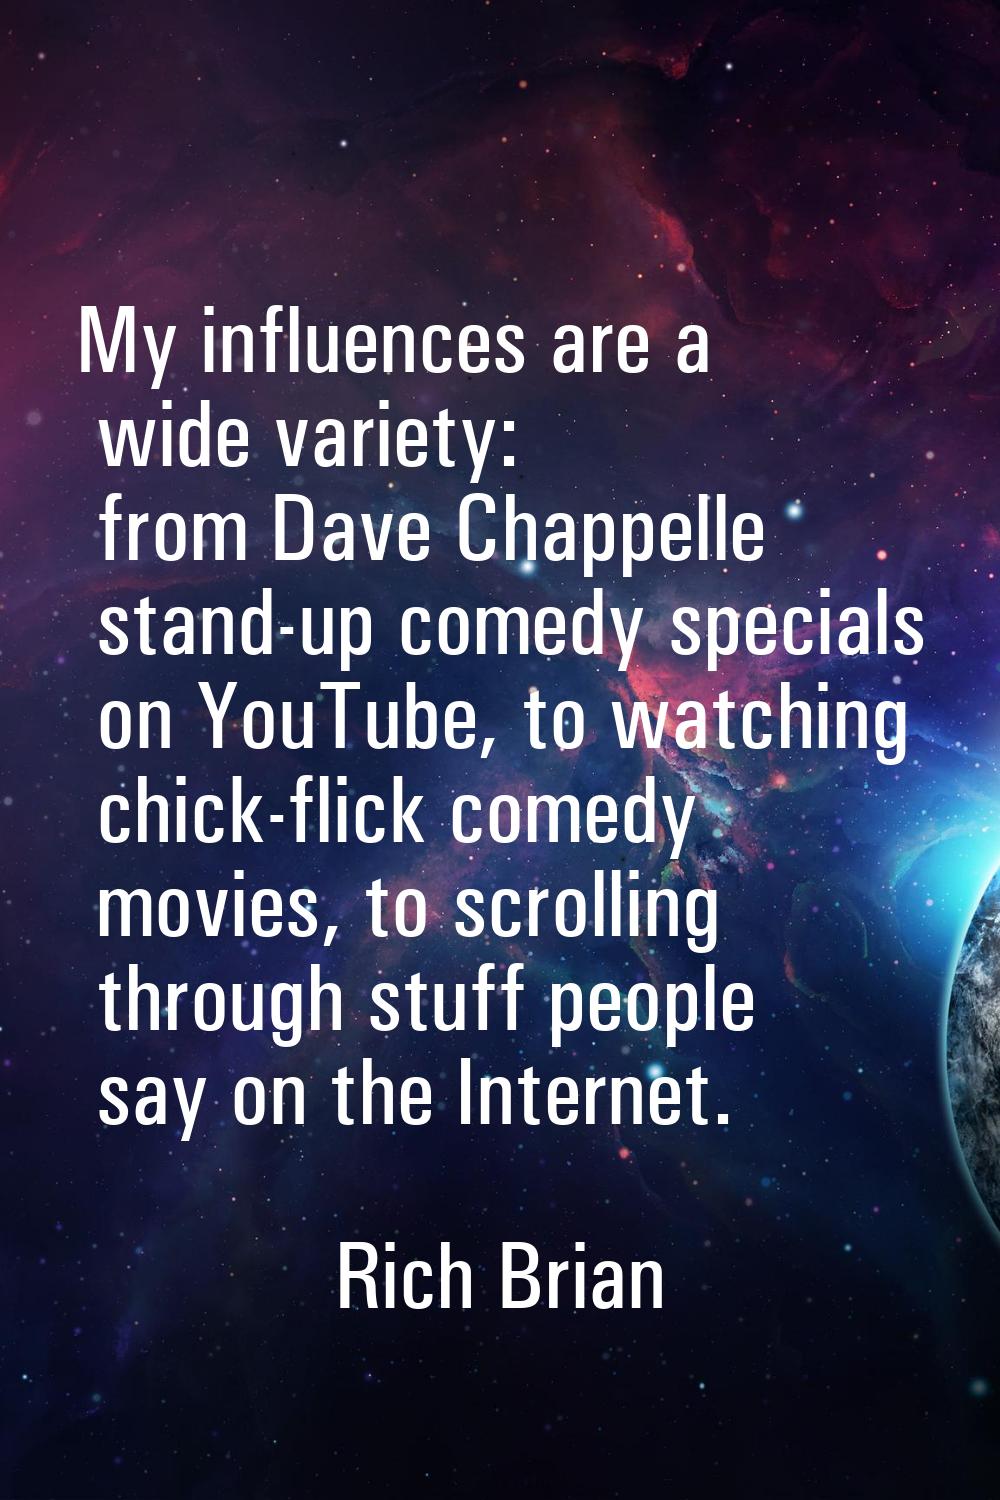 My influences are a wide variety: from Dave Chappelle stand-up comedy specials on YouTube, to watch